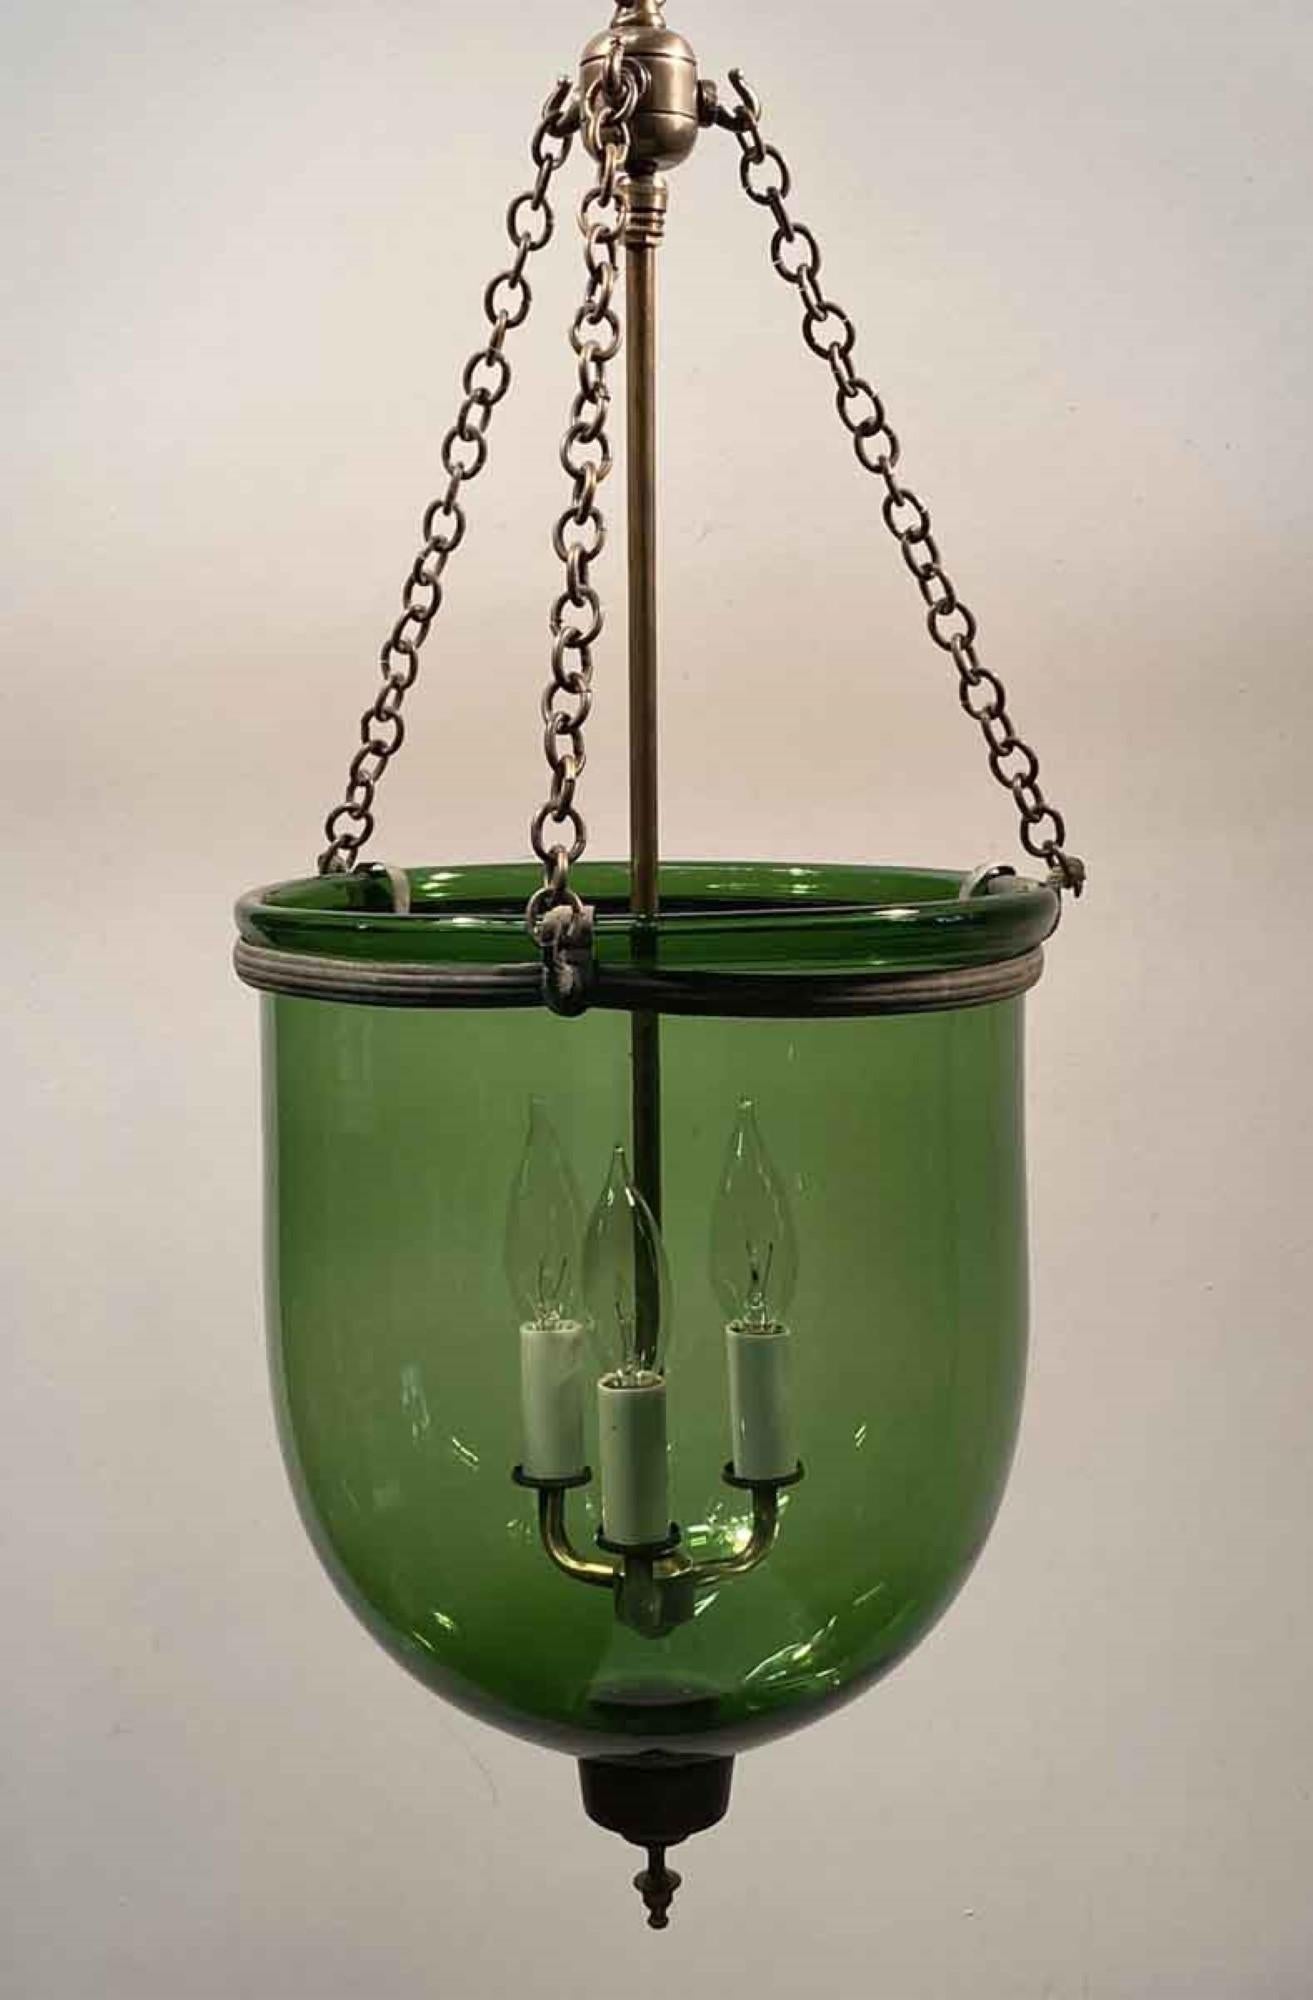 19th century hand blown green glass bell jar pendant lantern from England with a brass finial and new brass hardware. Features three candelabra lights. Price includes restoration. This can be seen at our 400 Gilligan St location in Scranton. PA.